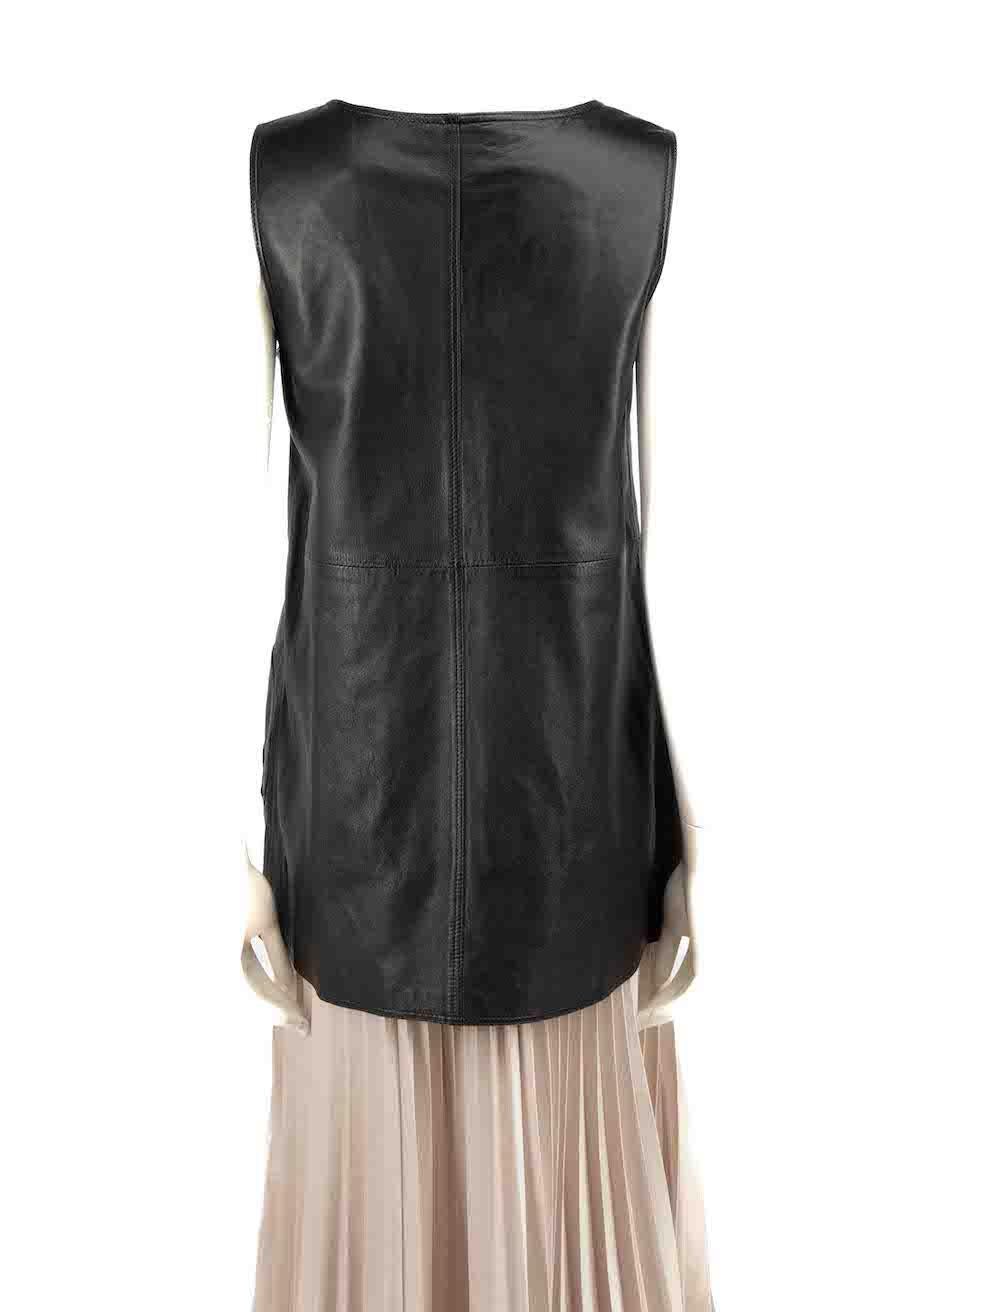 Dolce & Gabbana Black Leather Front Zip Vest Size S In Good Condition For Sale In London, GB